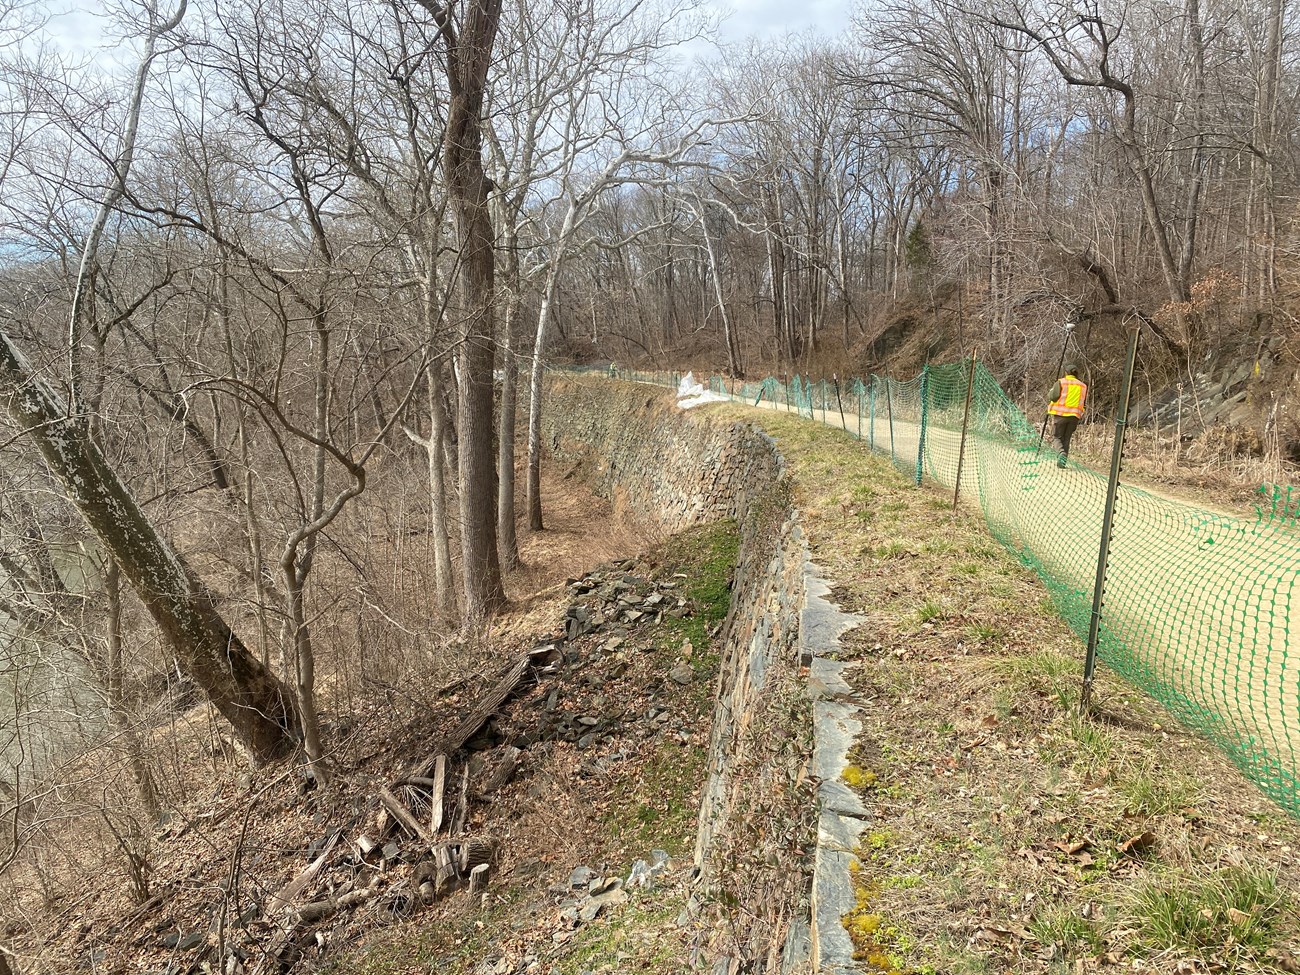 A dry-laid stone wall with safety fencing at the top next to a dirt path